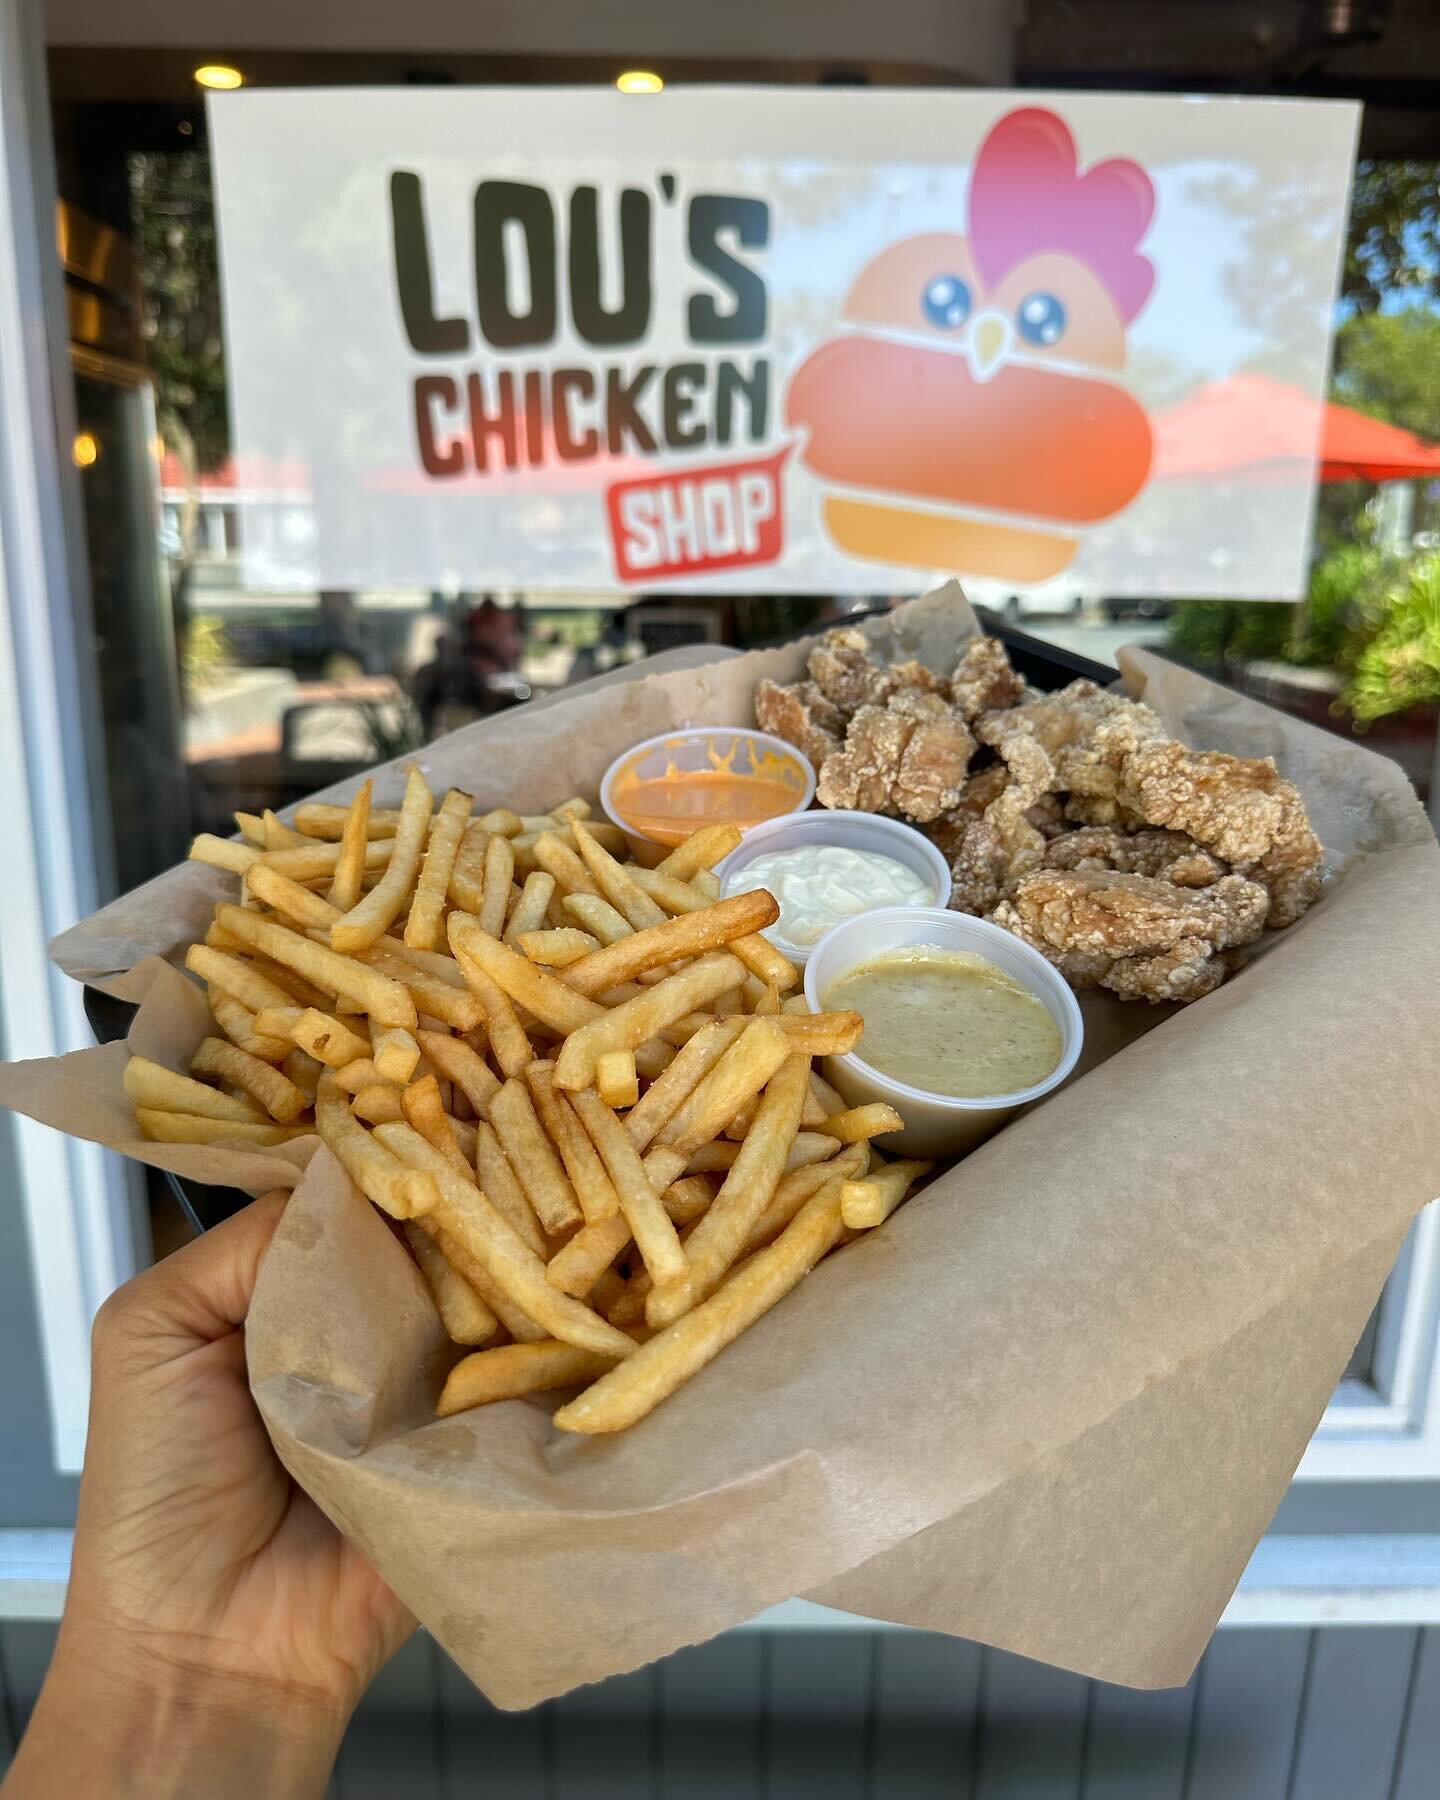 Get ready to roll with our Chicken Bites and Fries! These Bites are packed with flavor and served with a Japanese-style Mayo.  #louschickenshop #chickenbites #frenchfries #japanesemayo